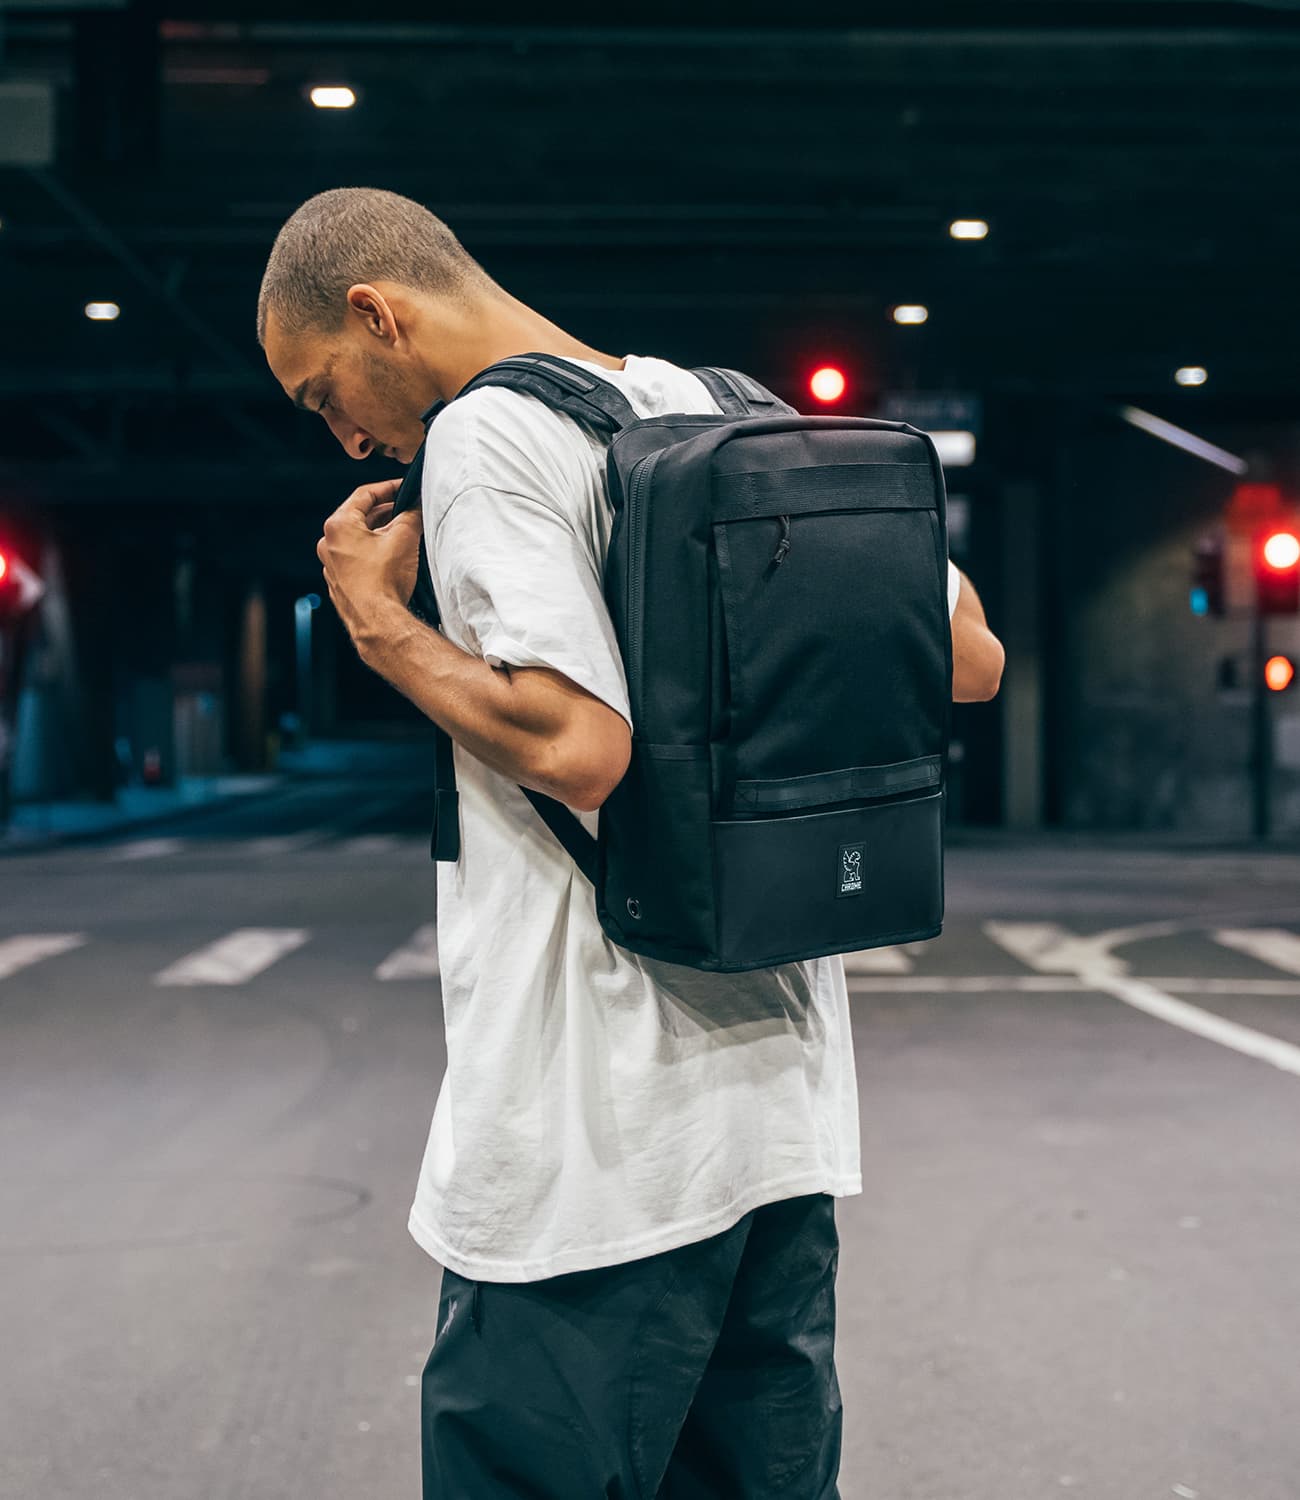 Hondo Backpack in black worn by a person